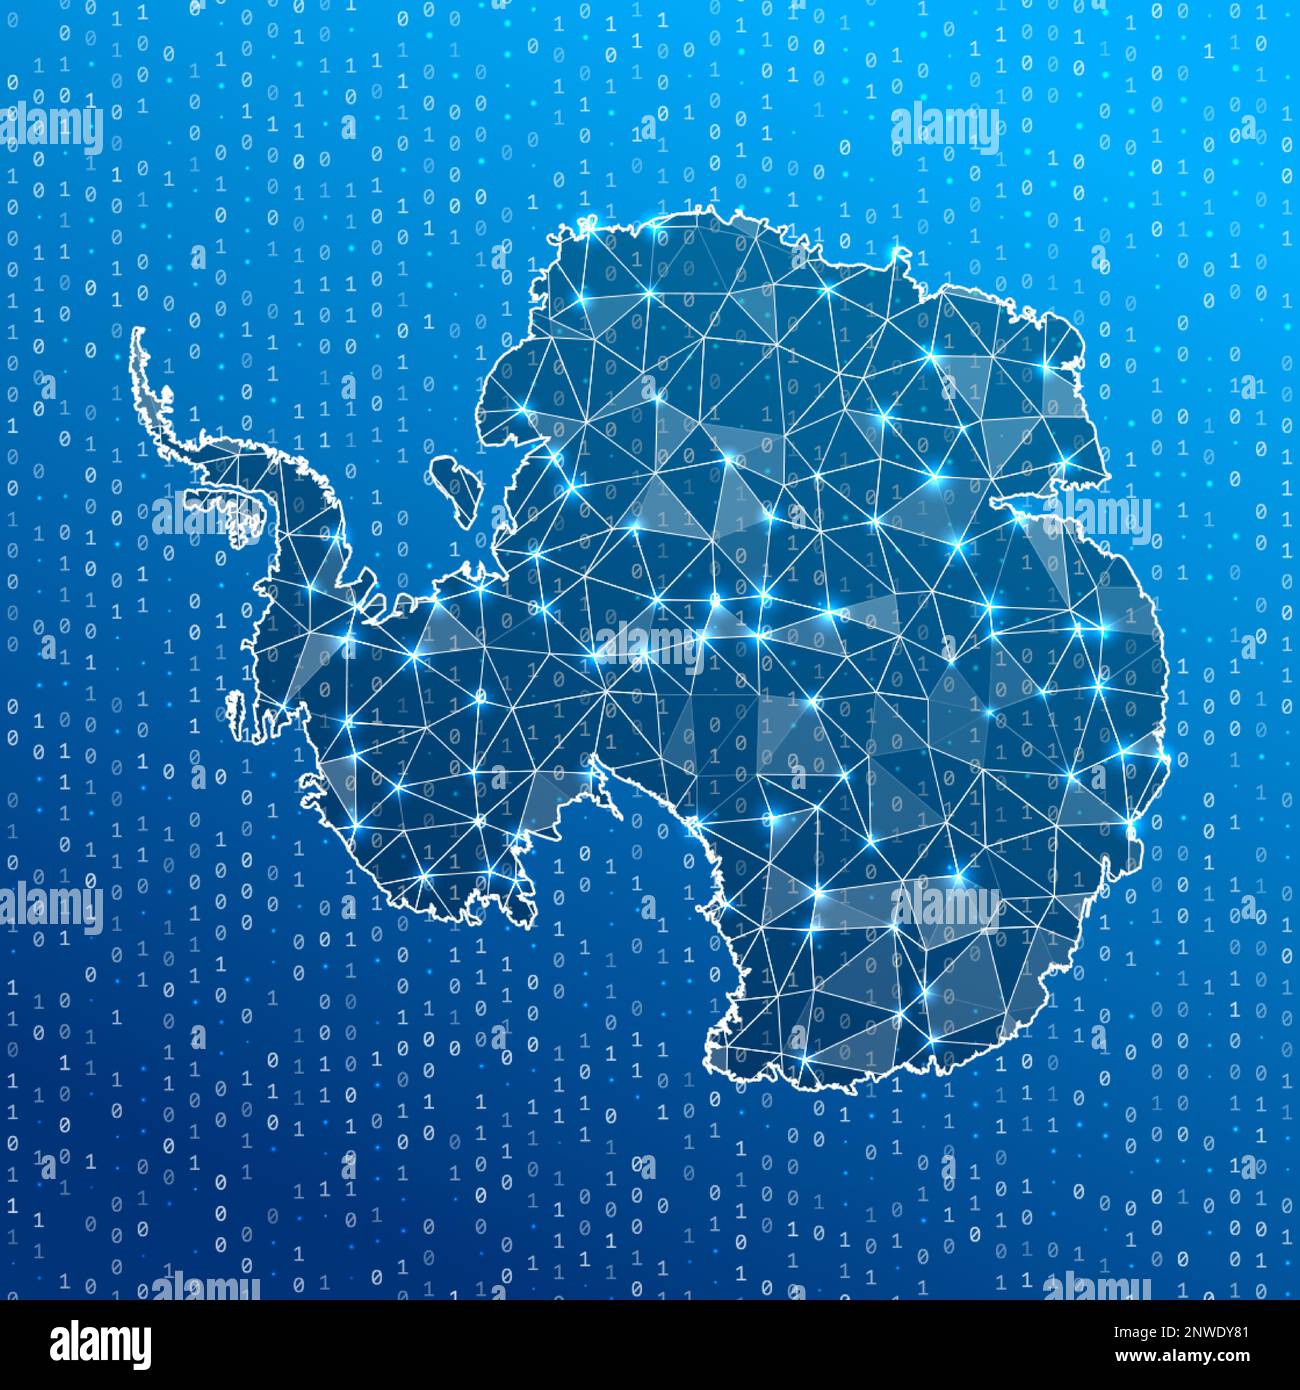 Network map of Antarctica. Country digital connections map. Technology, internet, network, telecommunication concept. Vector illustration. Stock Vector